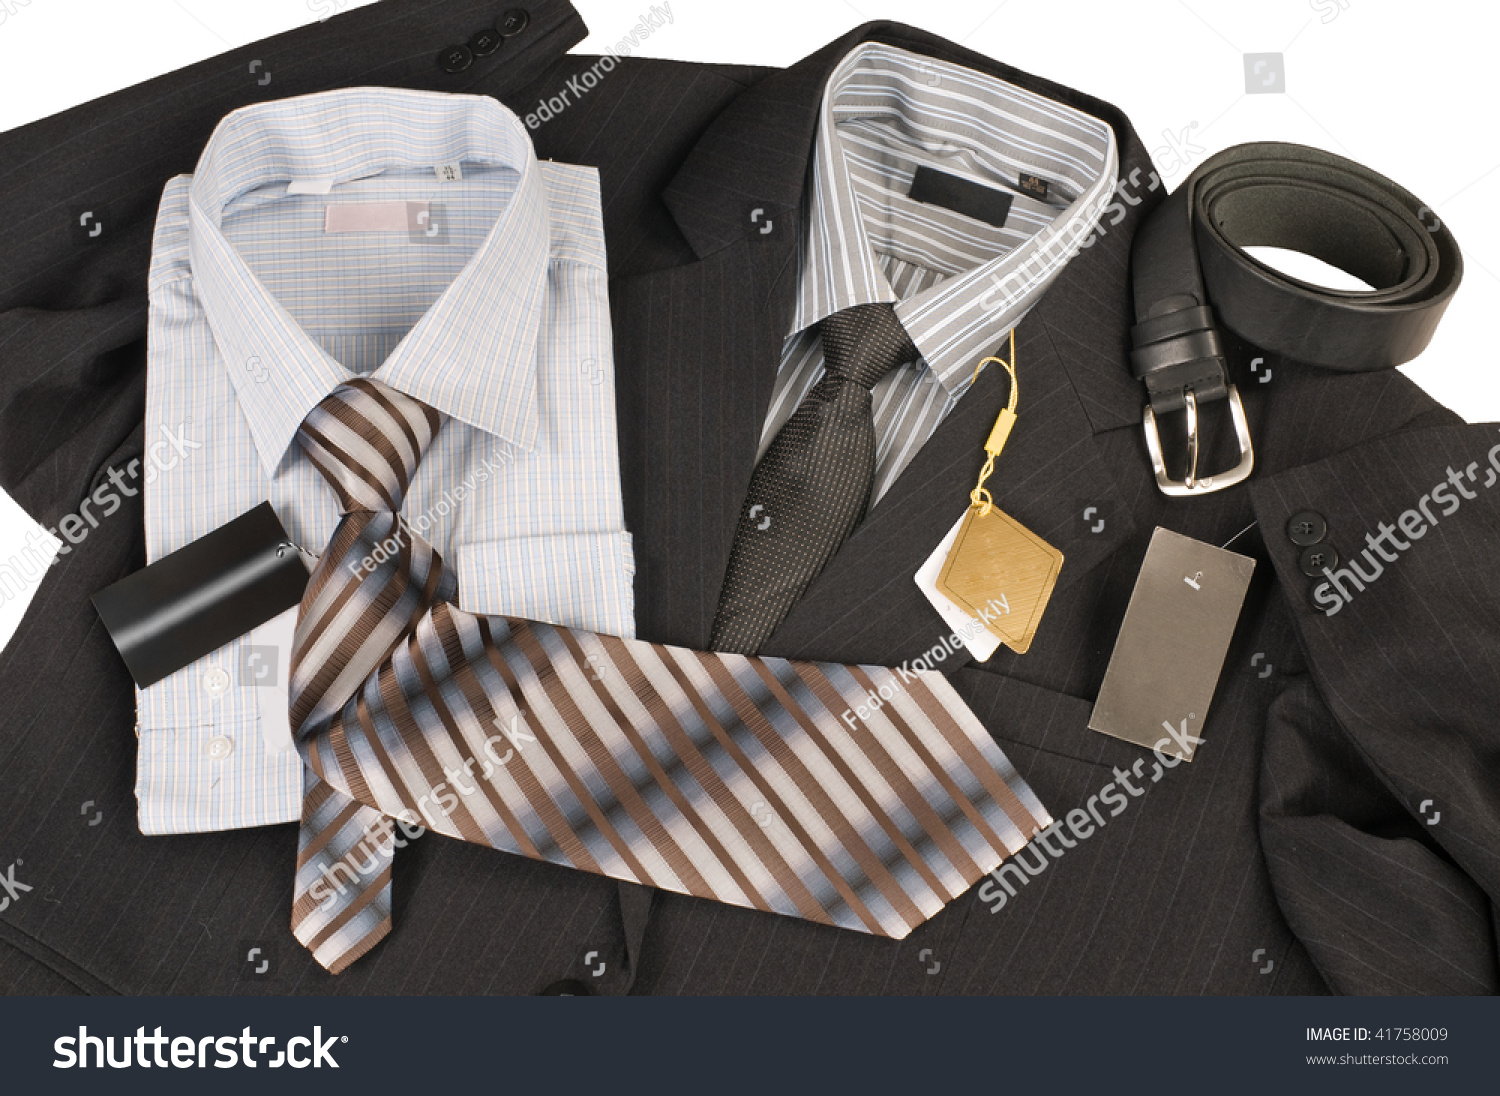 The Fashionable Men'S Wear Is Sold In Shop. Stock Photo 41758009 ...